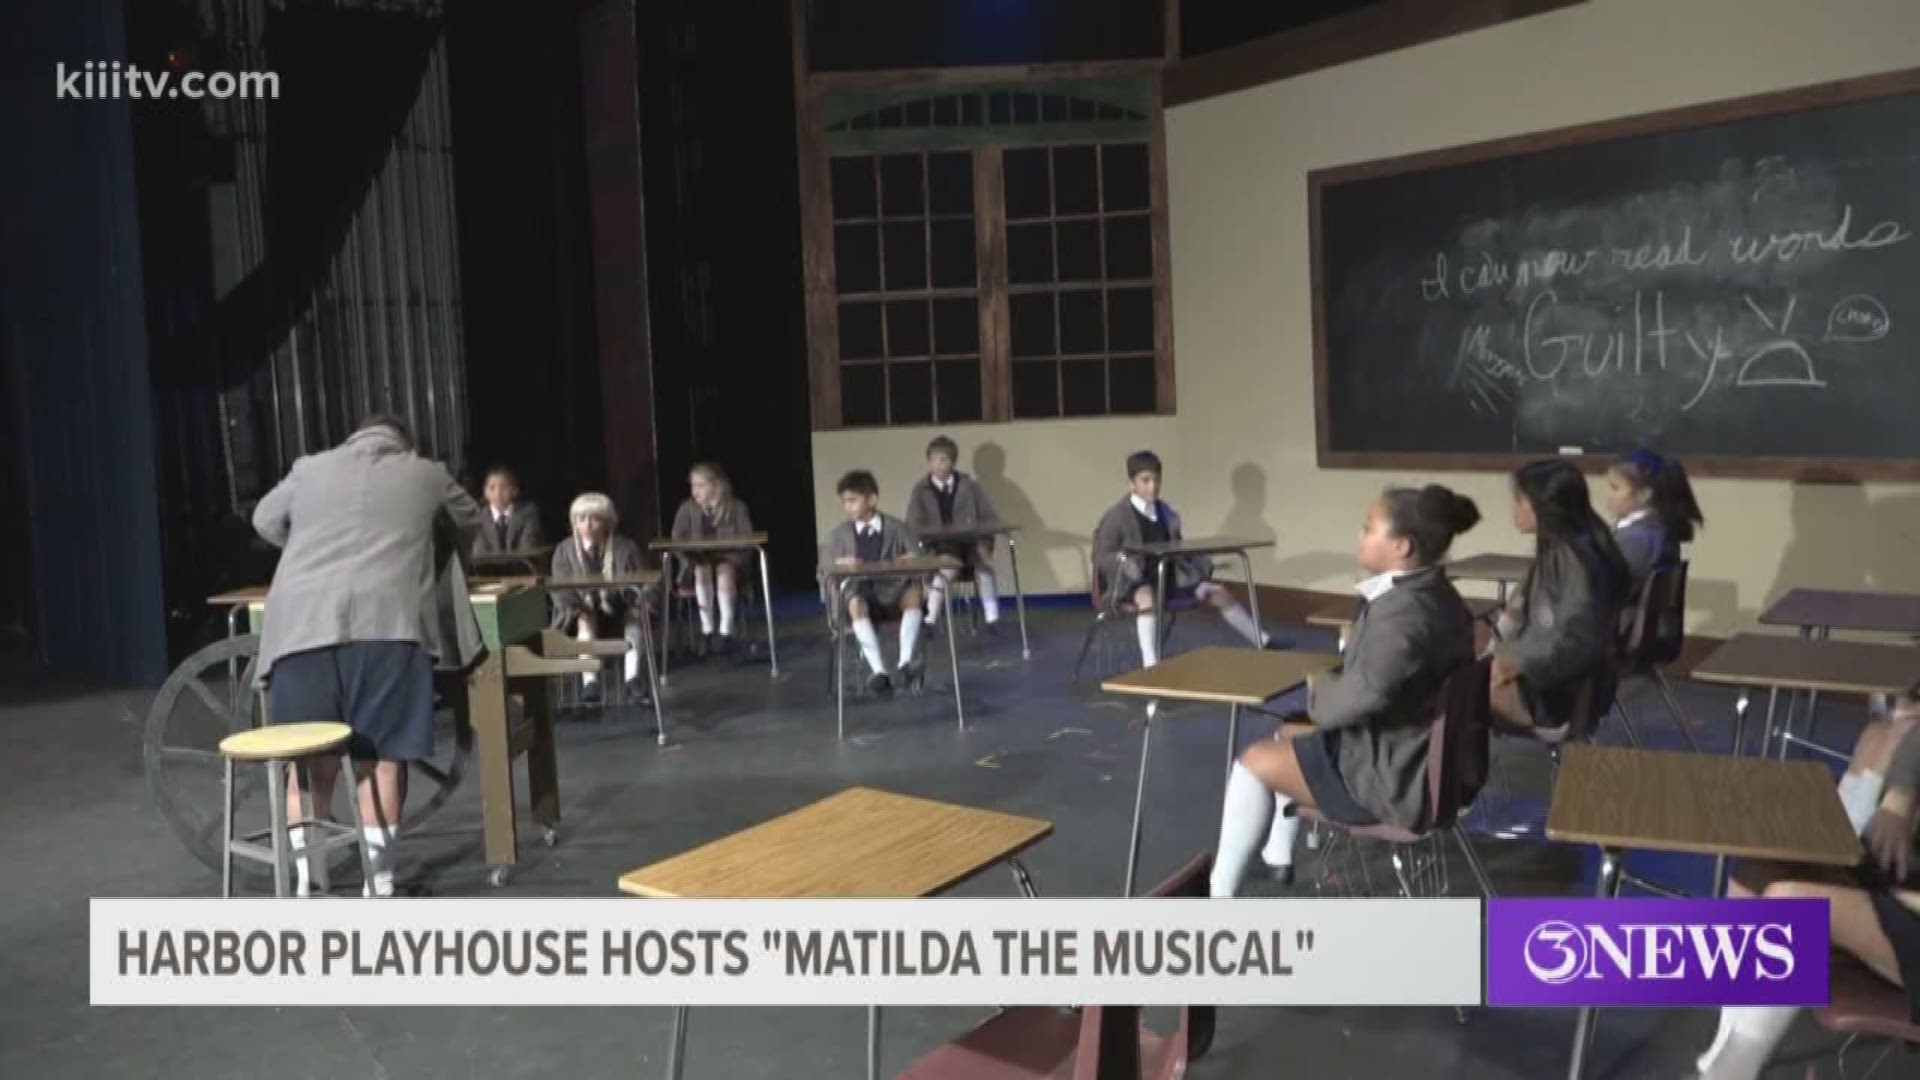 Matilda the musical is in town! The talented cast comes from our very own Coastal Bend.